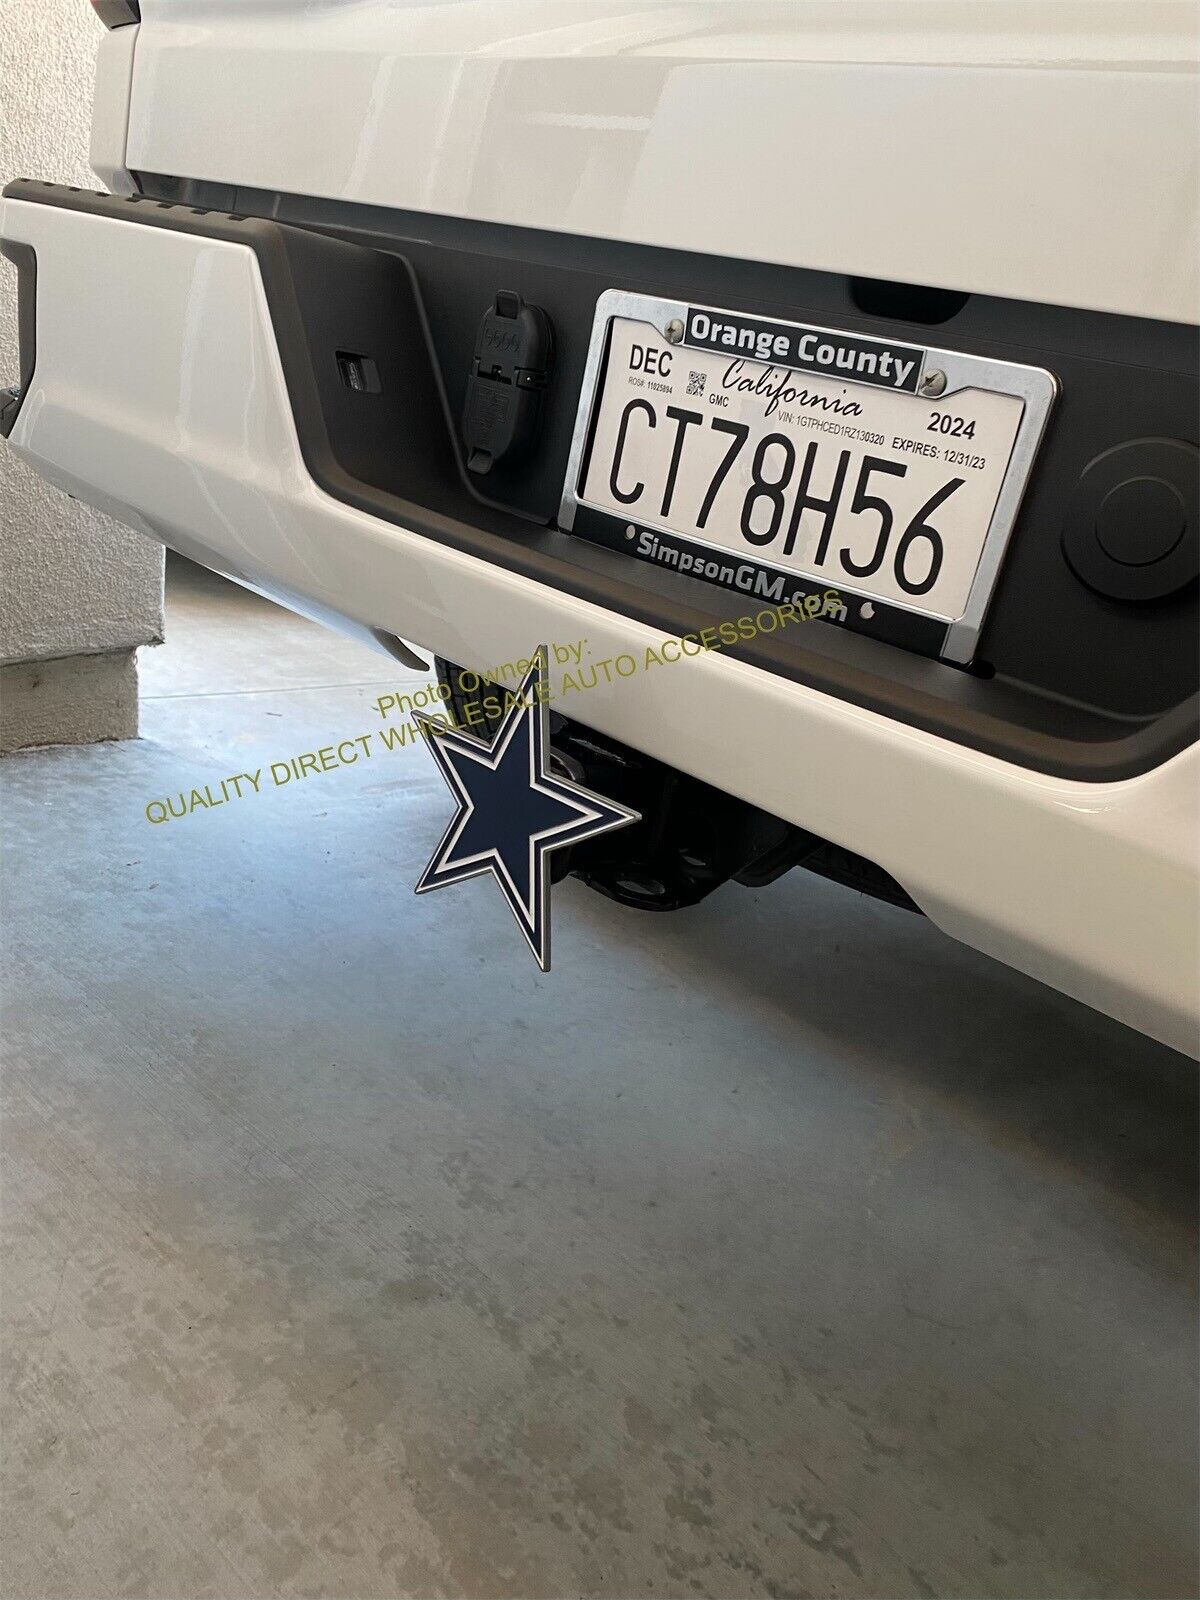 NEWDallas Cowboys NFL Authentic Large BIG Star Hitch Cover BEST SUV Truck Gift